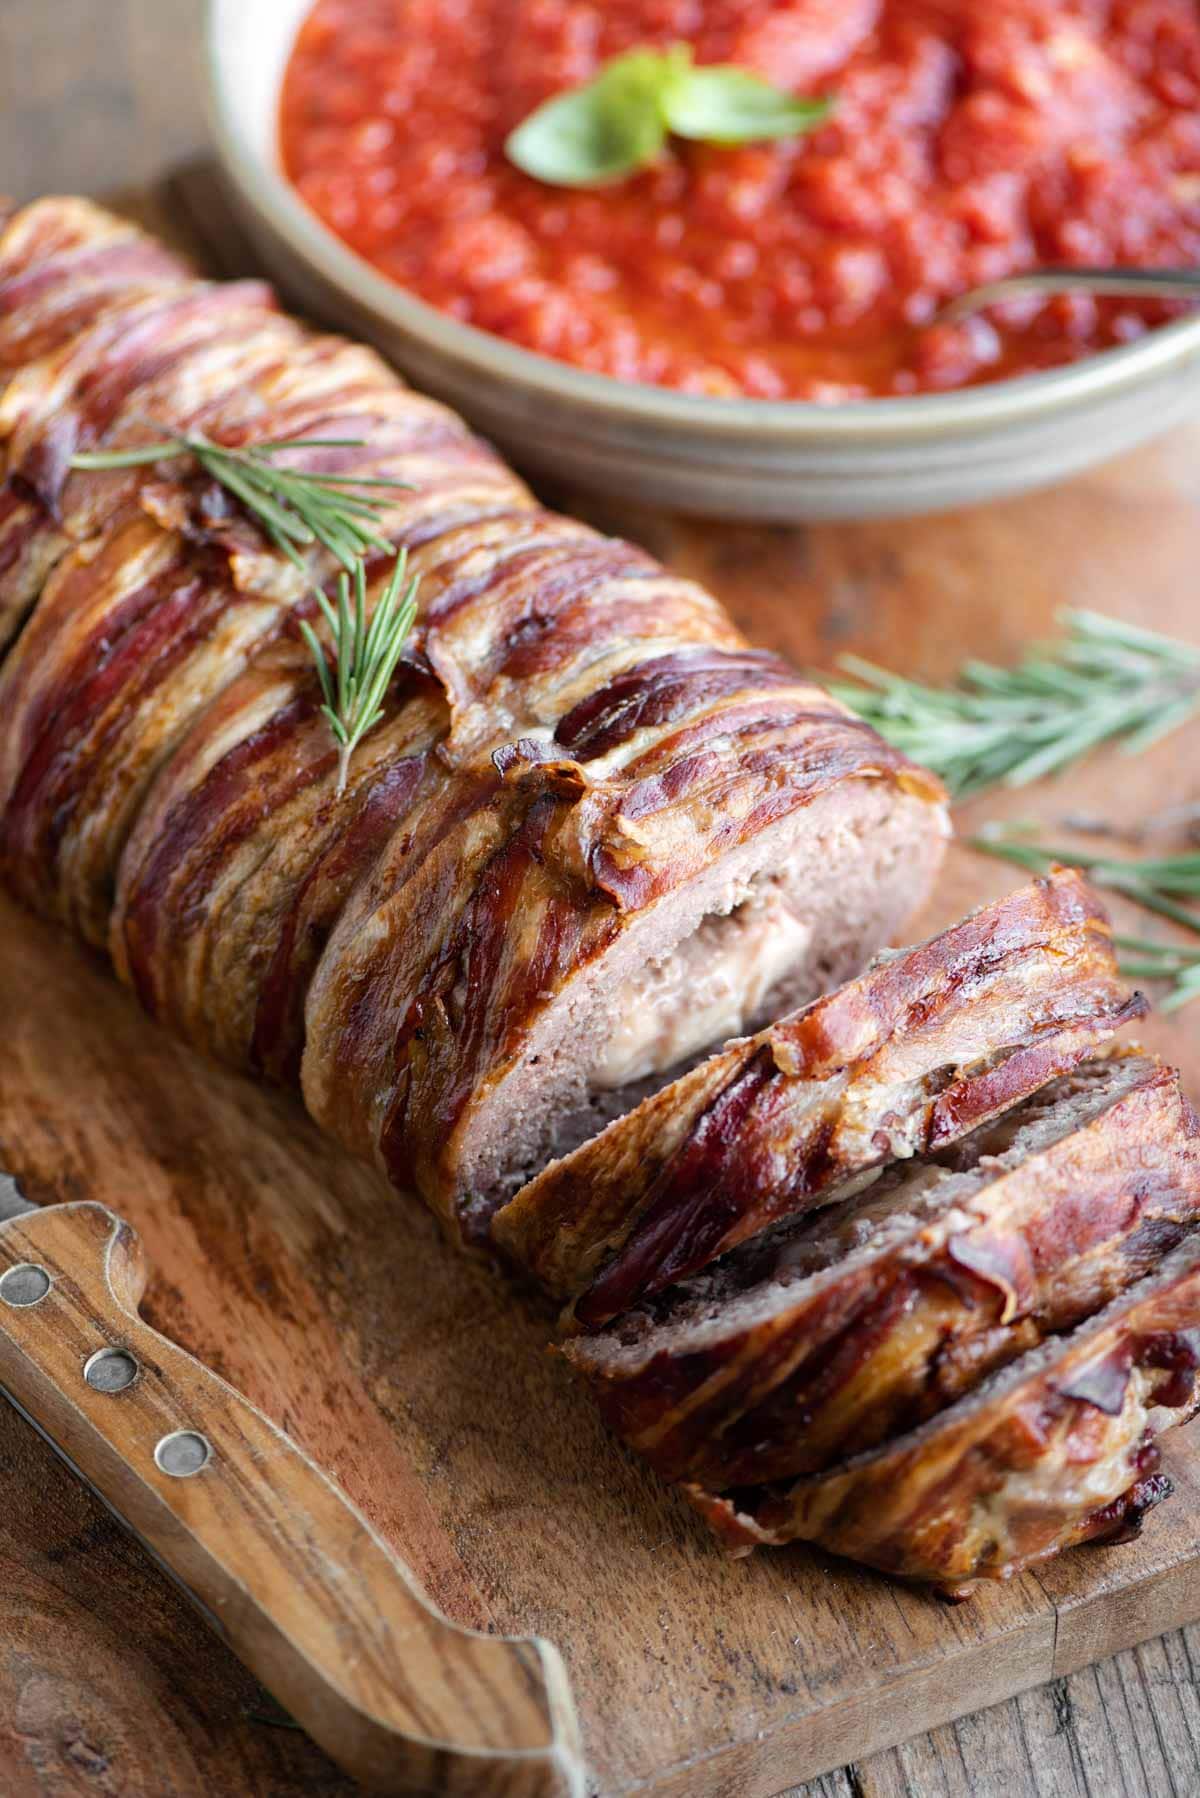 An Italian meatloaf wrapped in pancetta sitting on a wooden cutting board with some slices cut